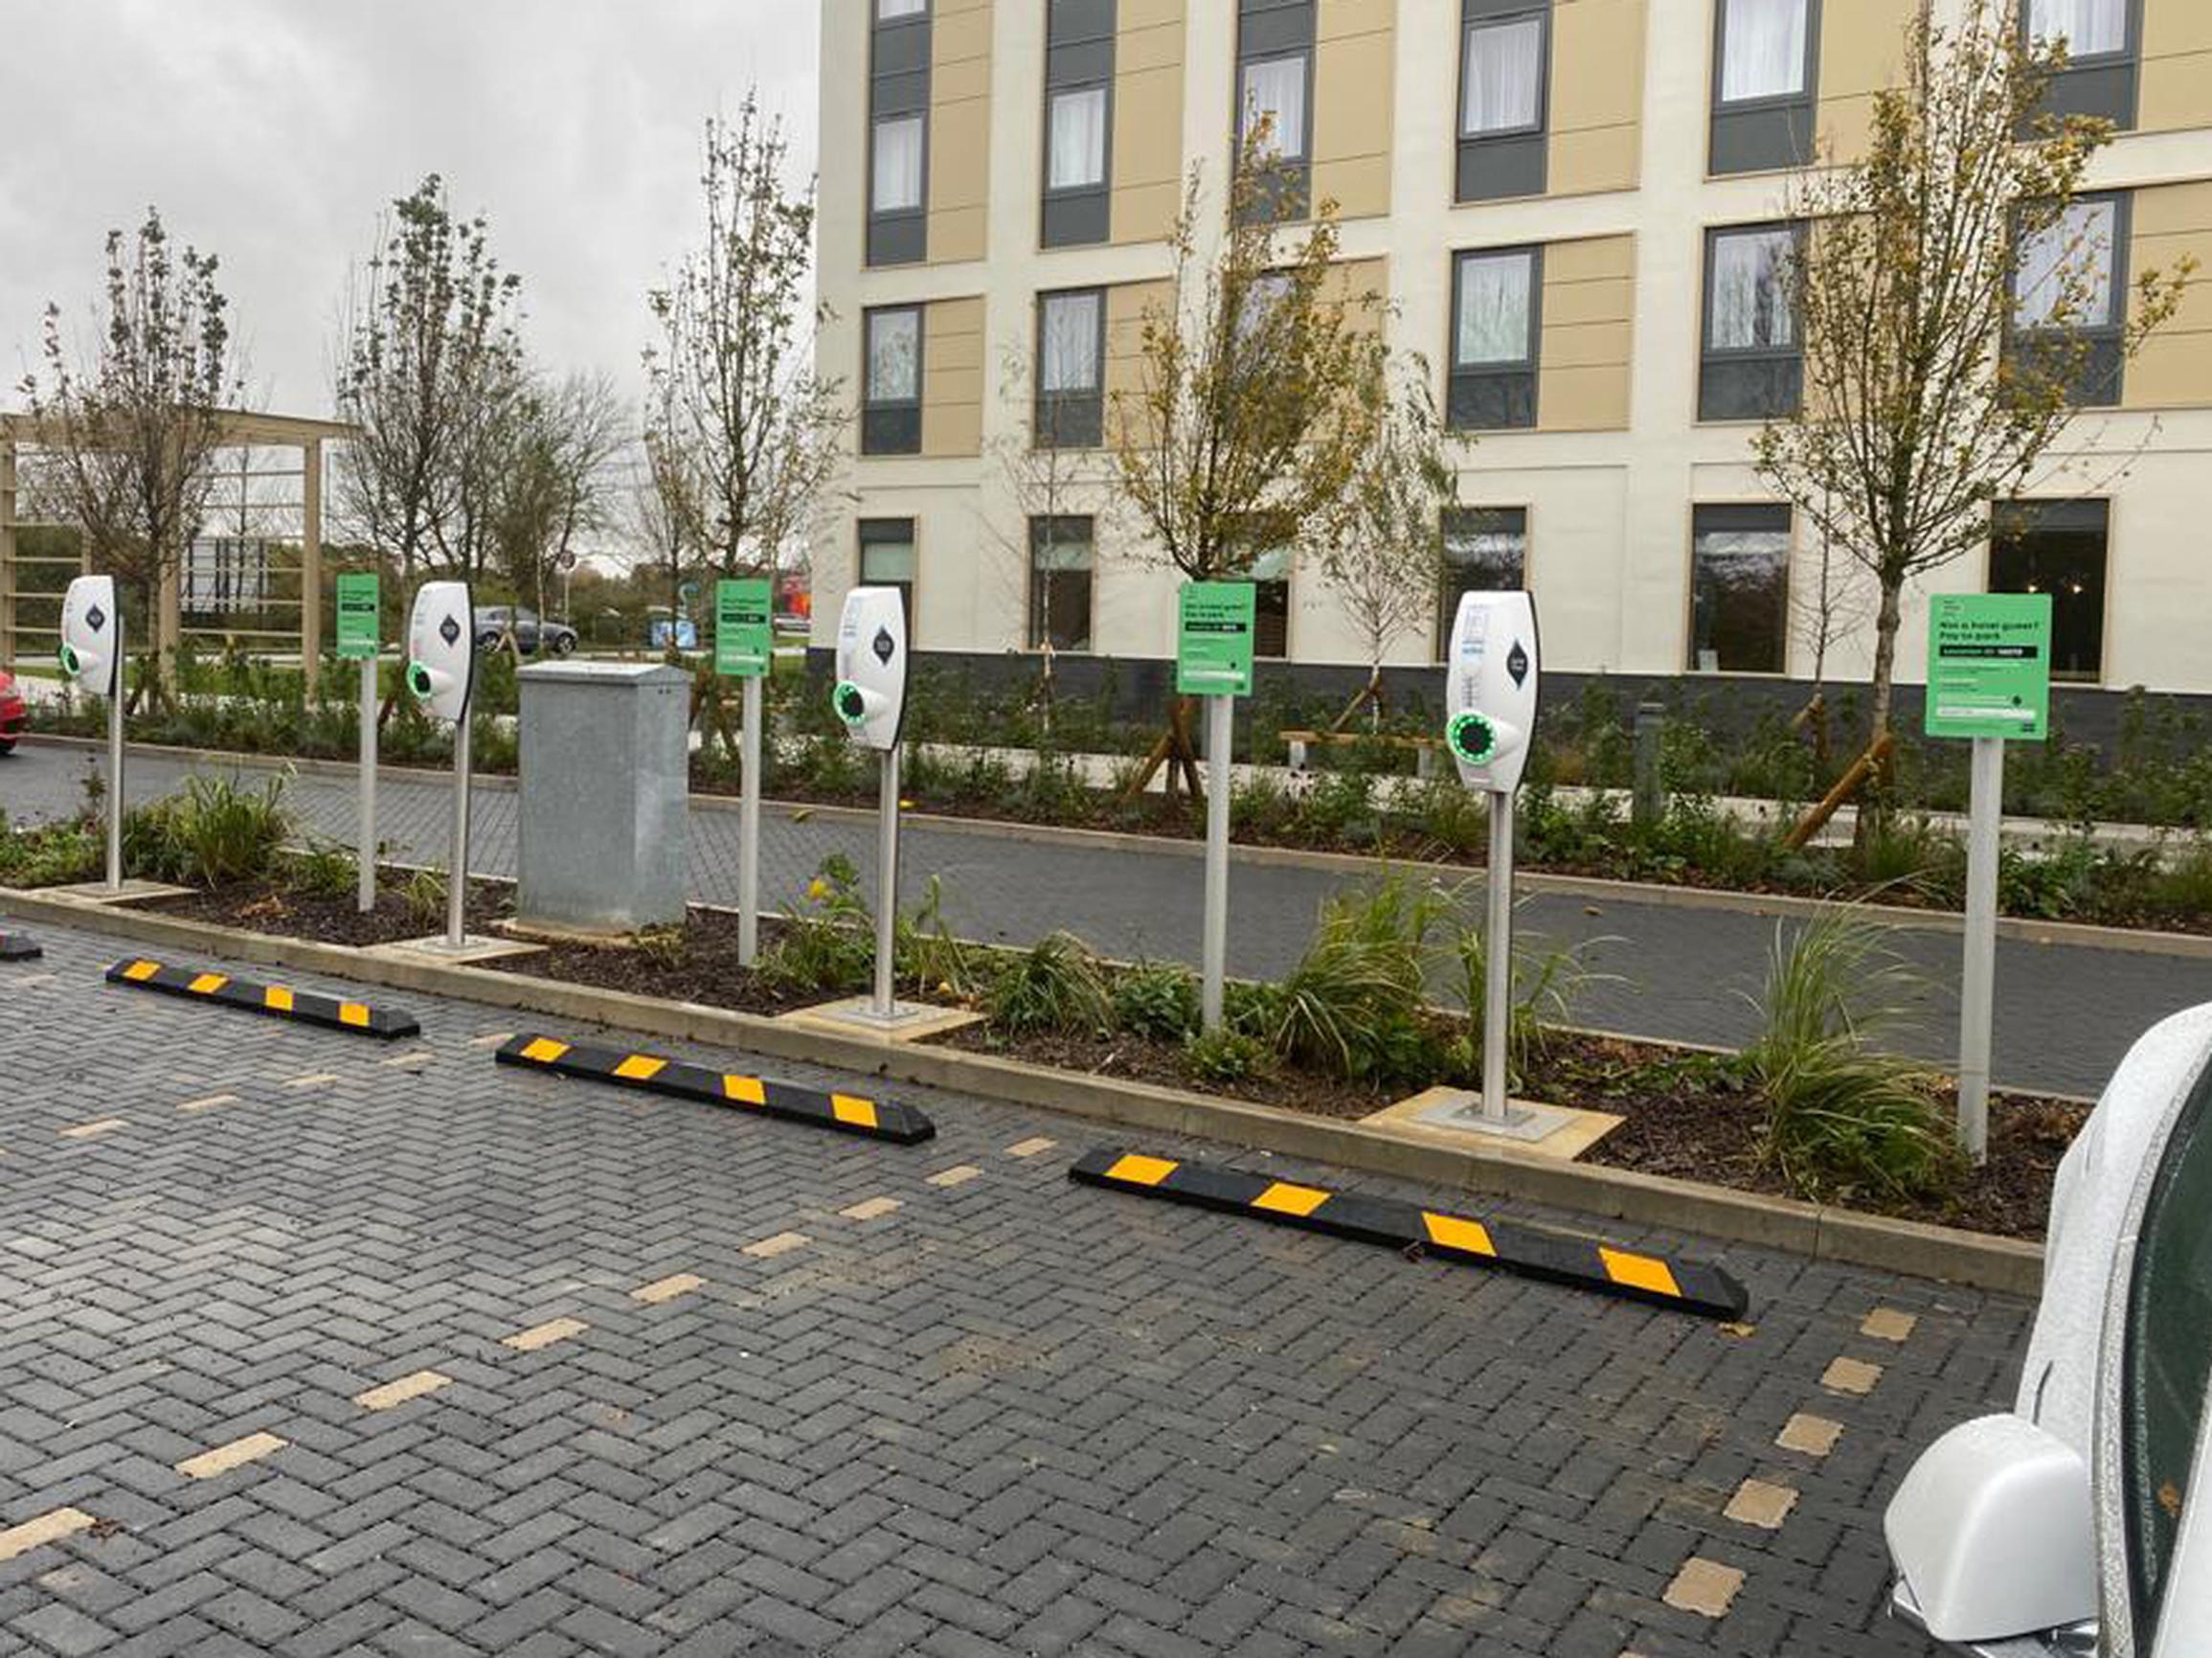 EV chargers at the Holiday Inn Express, Bicester